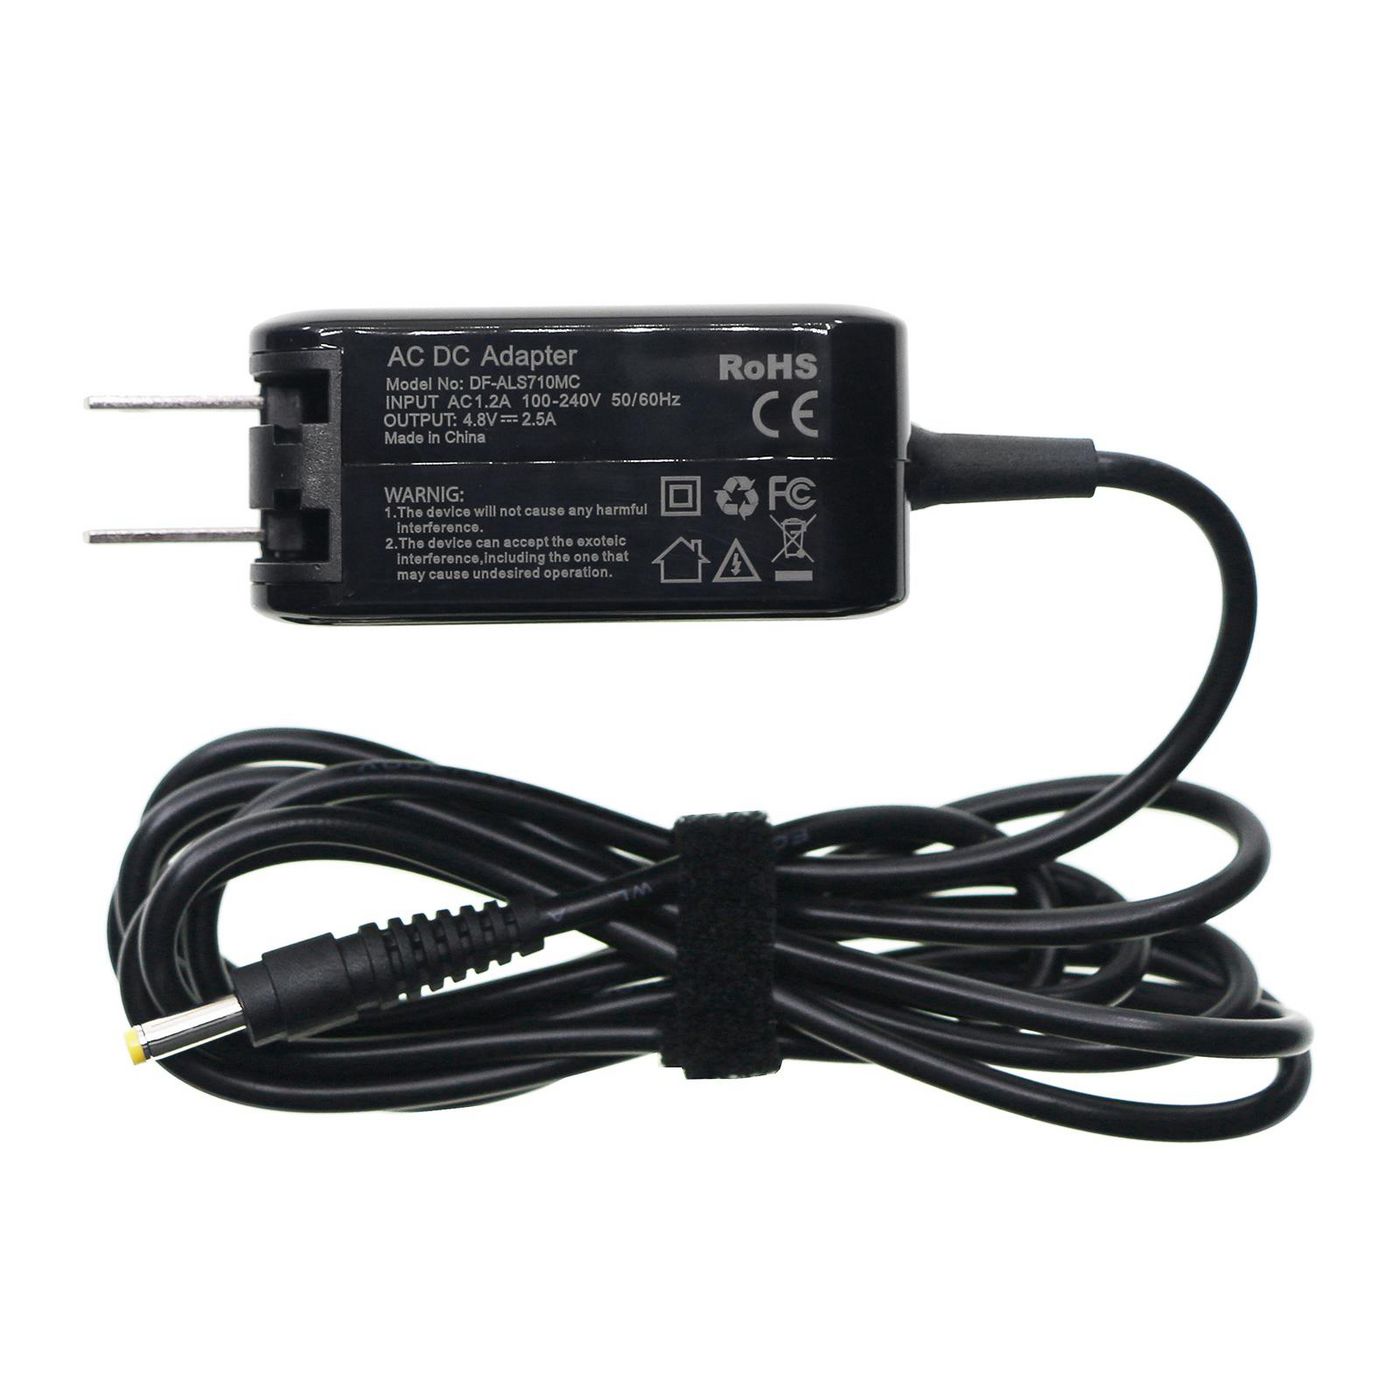 Charger for Olympus Camera,